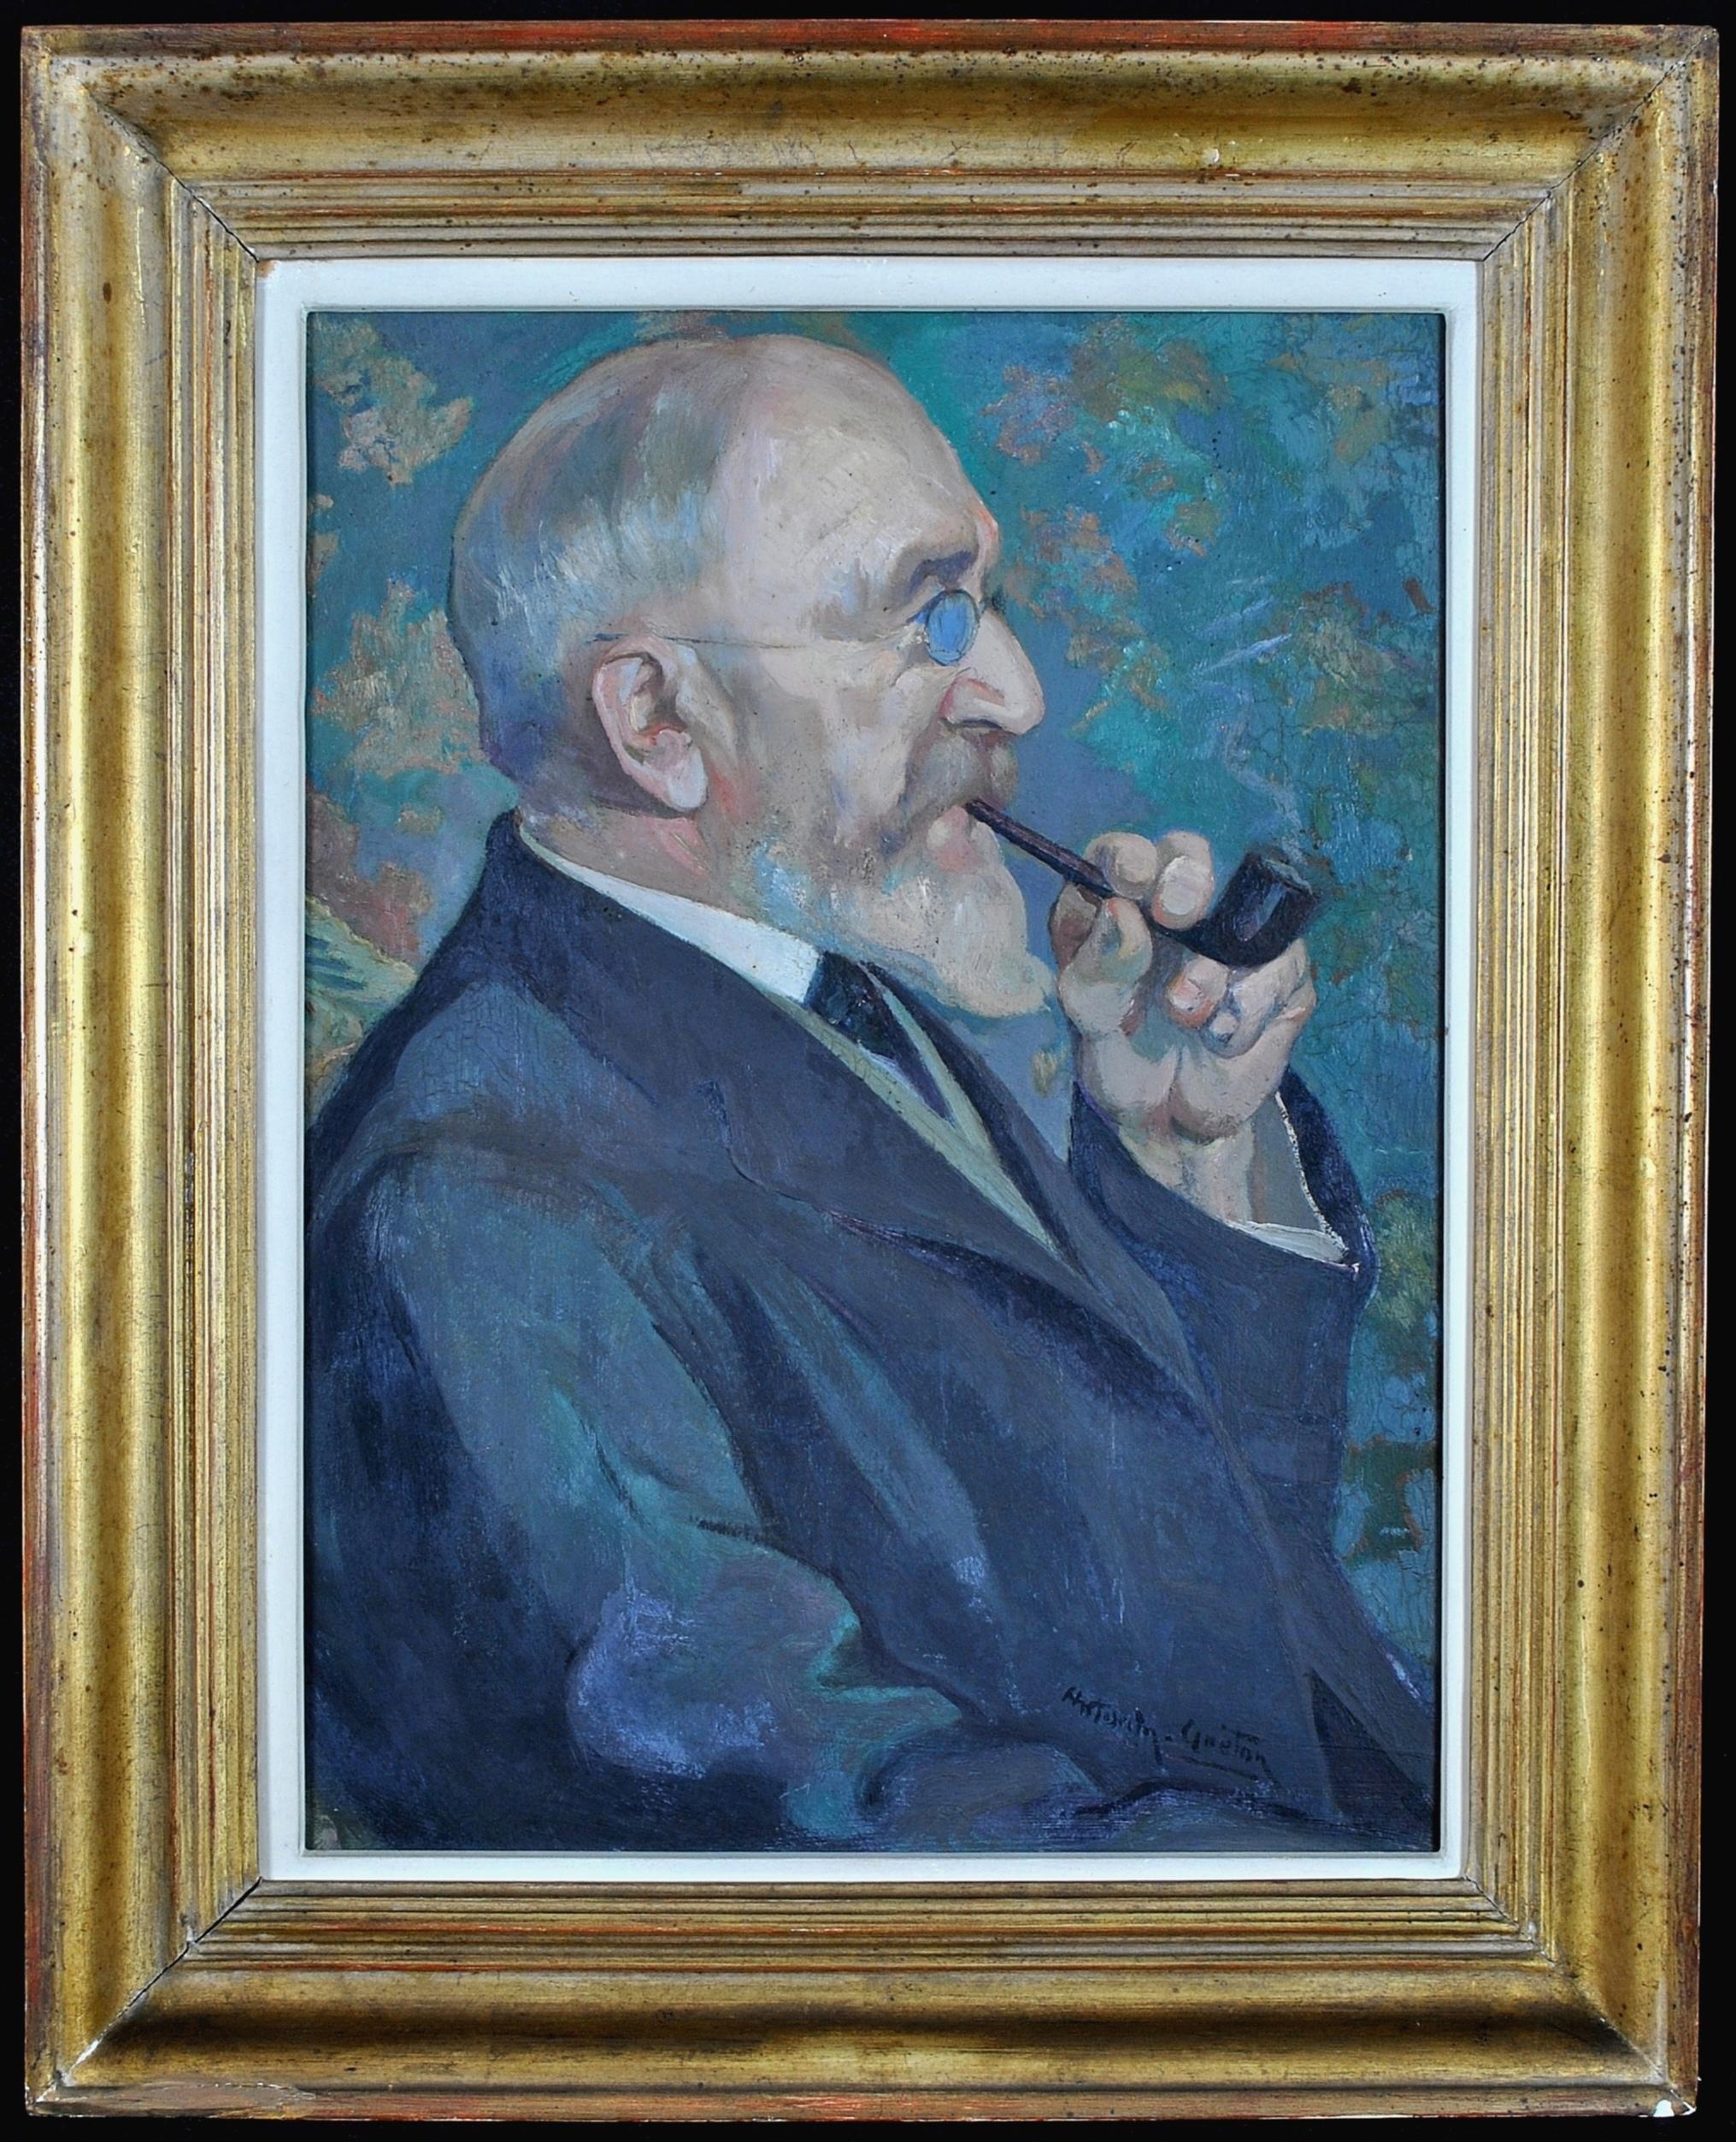 Antonin Guéton Portrait Painting - Gentleman with a Pipe - French Post Impressionist Smoking Portrait Oil Painting